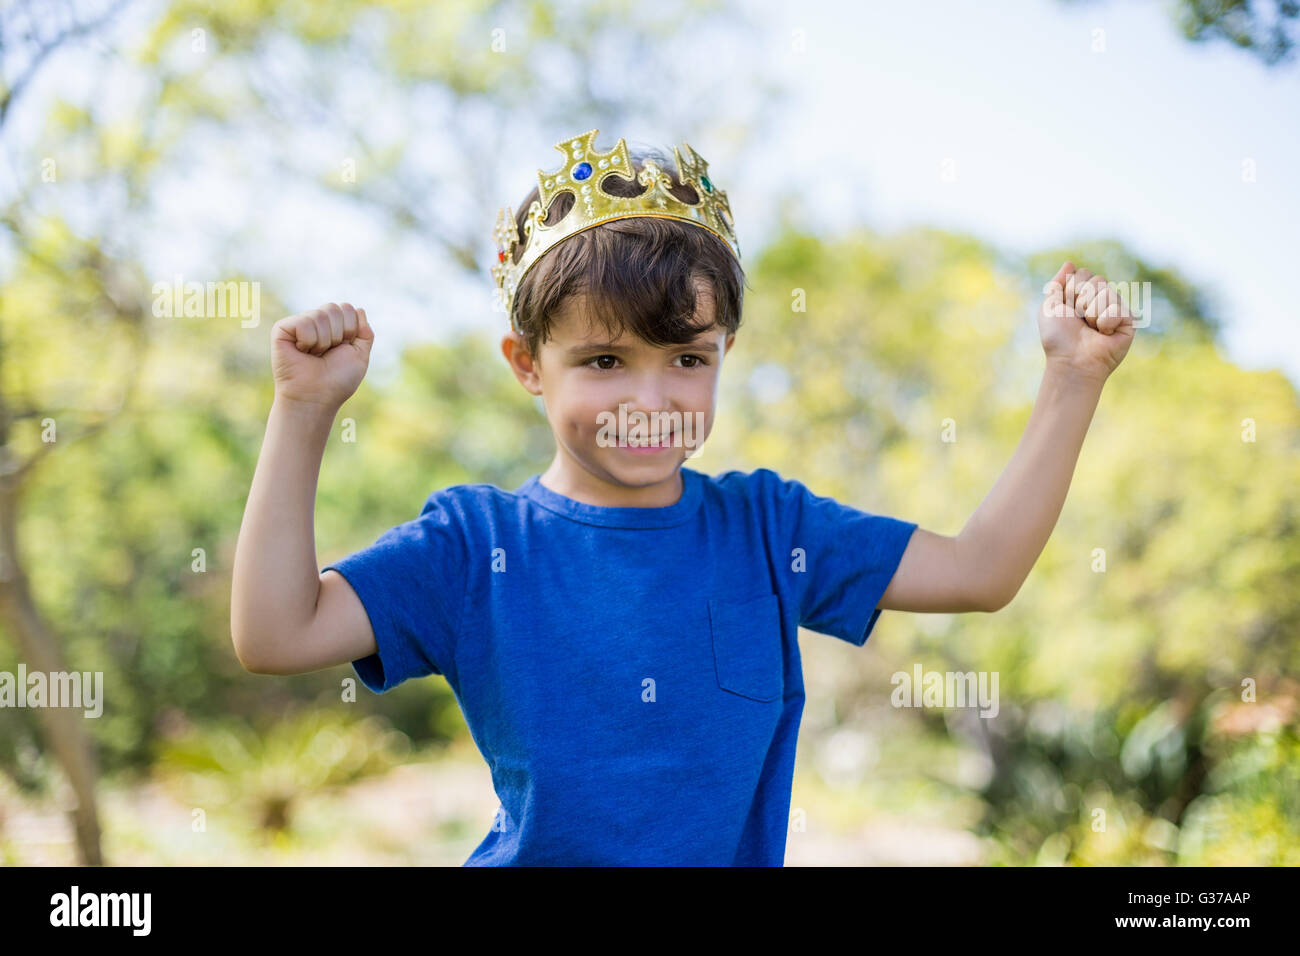 Boy clenching his fists in excitement Stock Photo